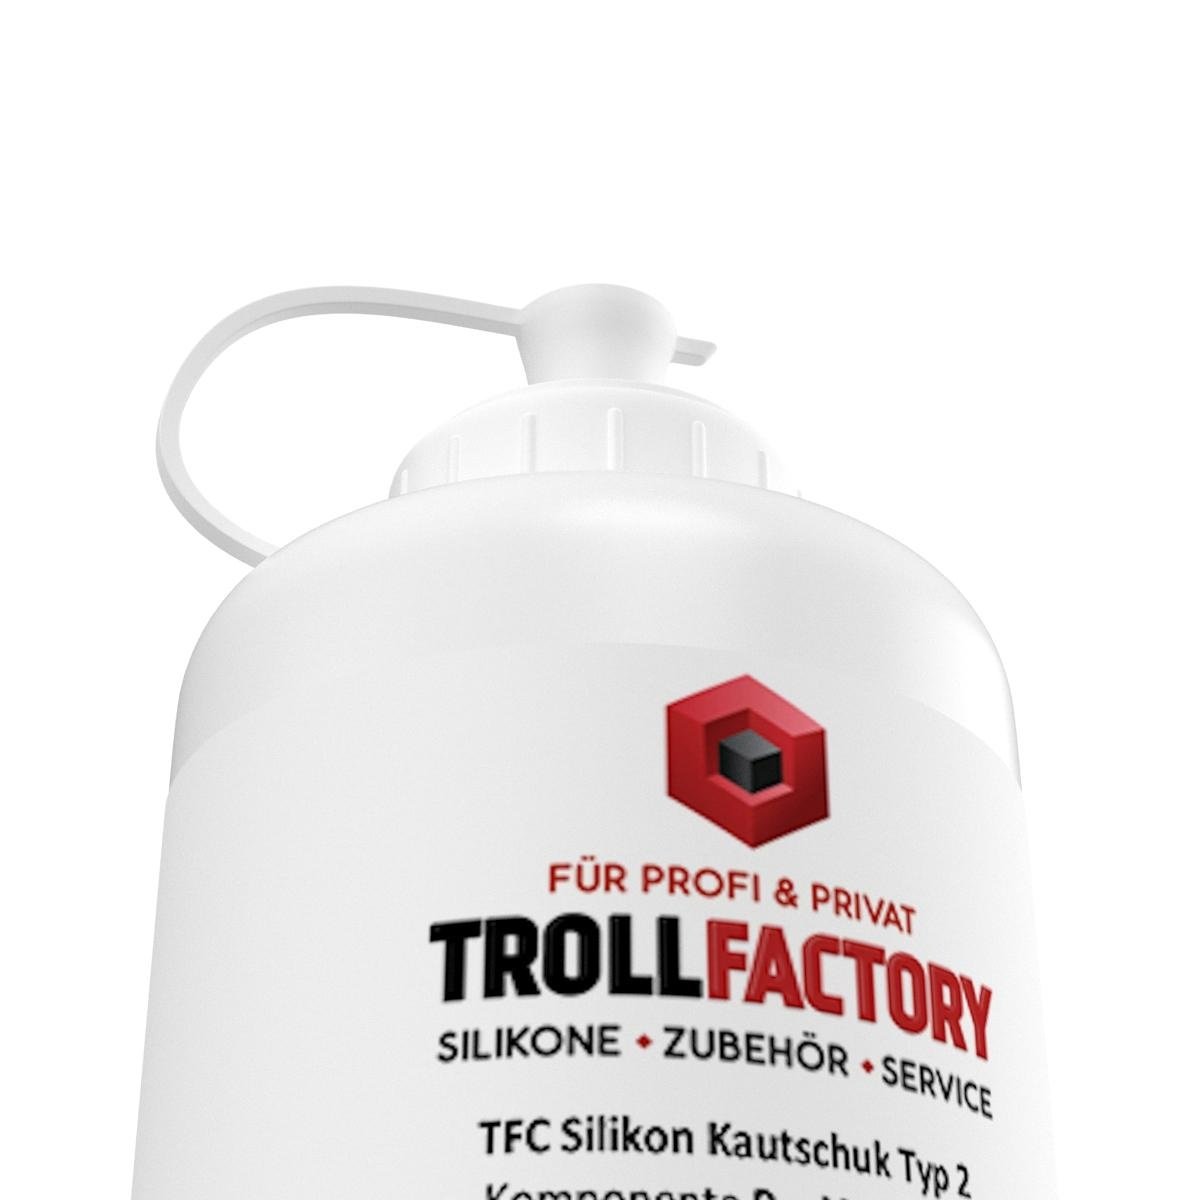 Troll Factory TFC Troll Factory Silicone Rubber type 2 silicone 1000g